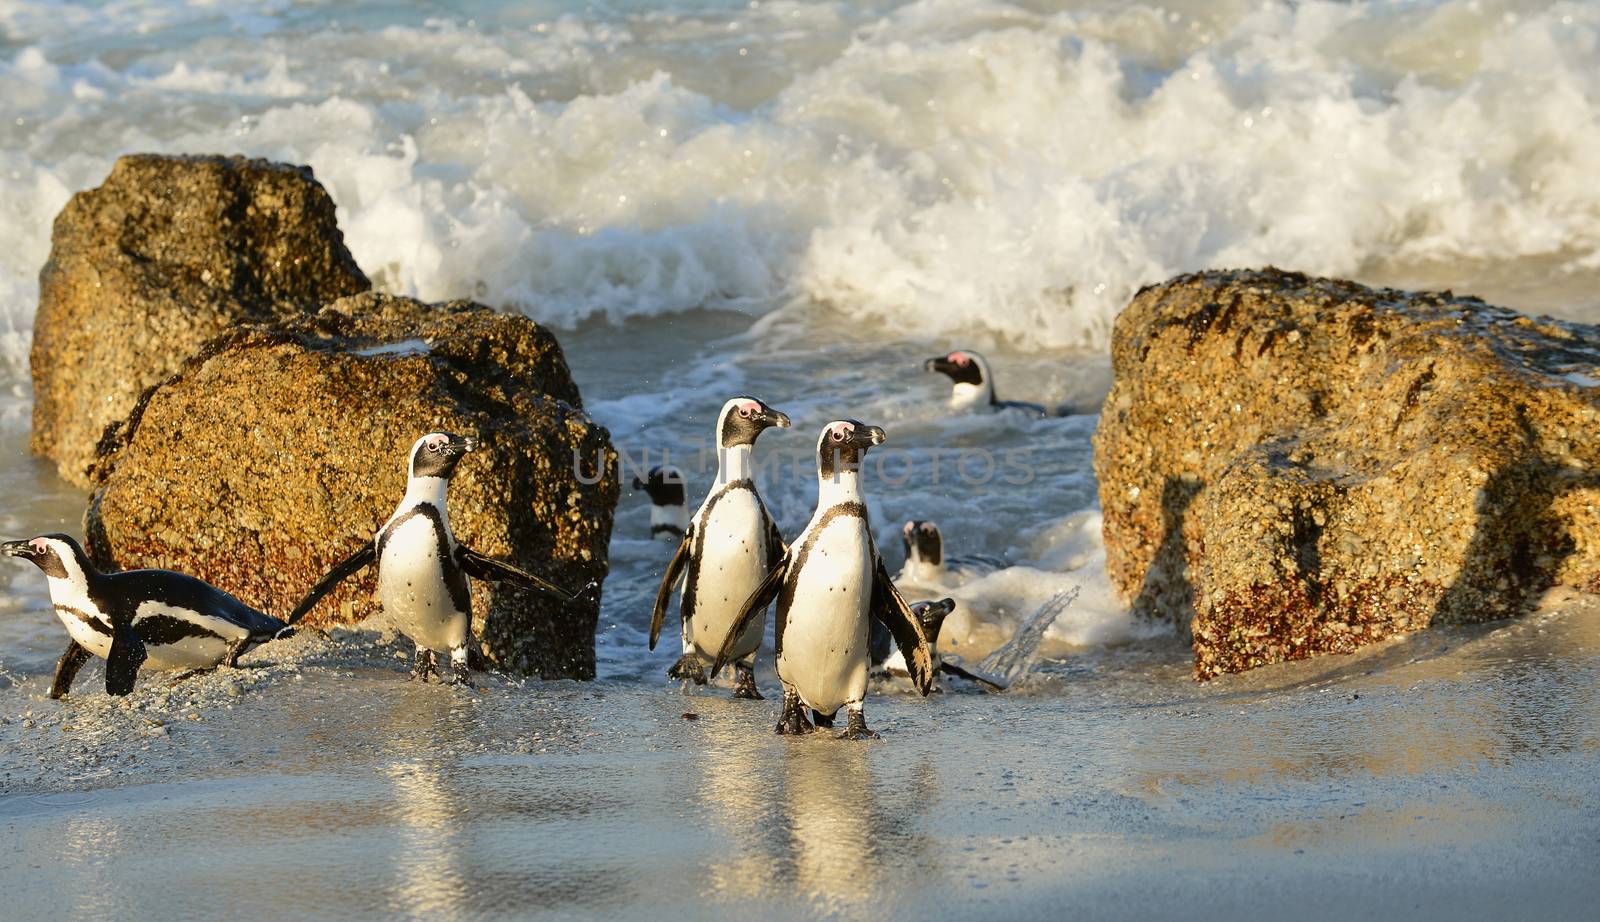  African penguins by SURZ